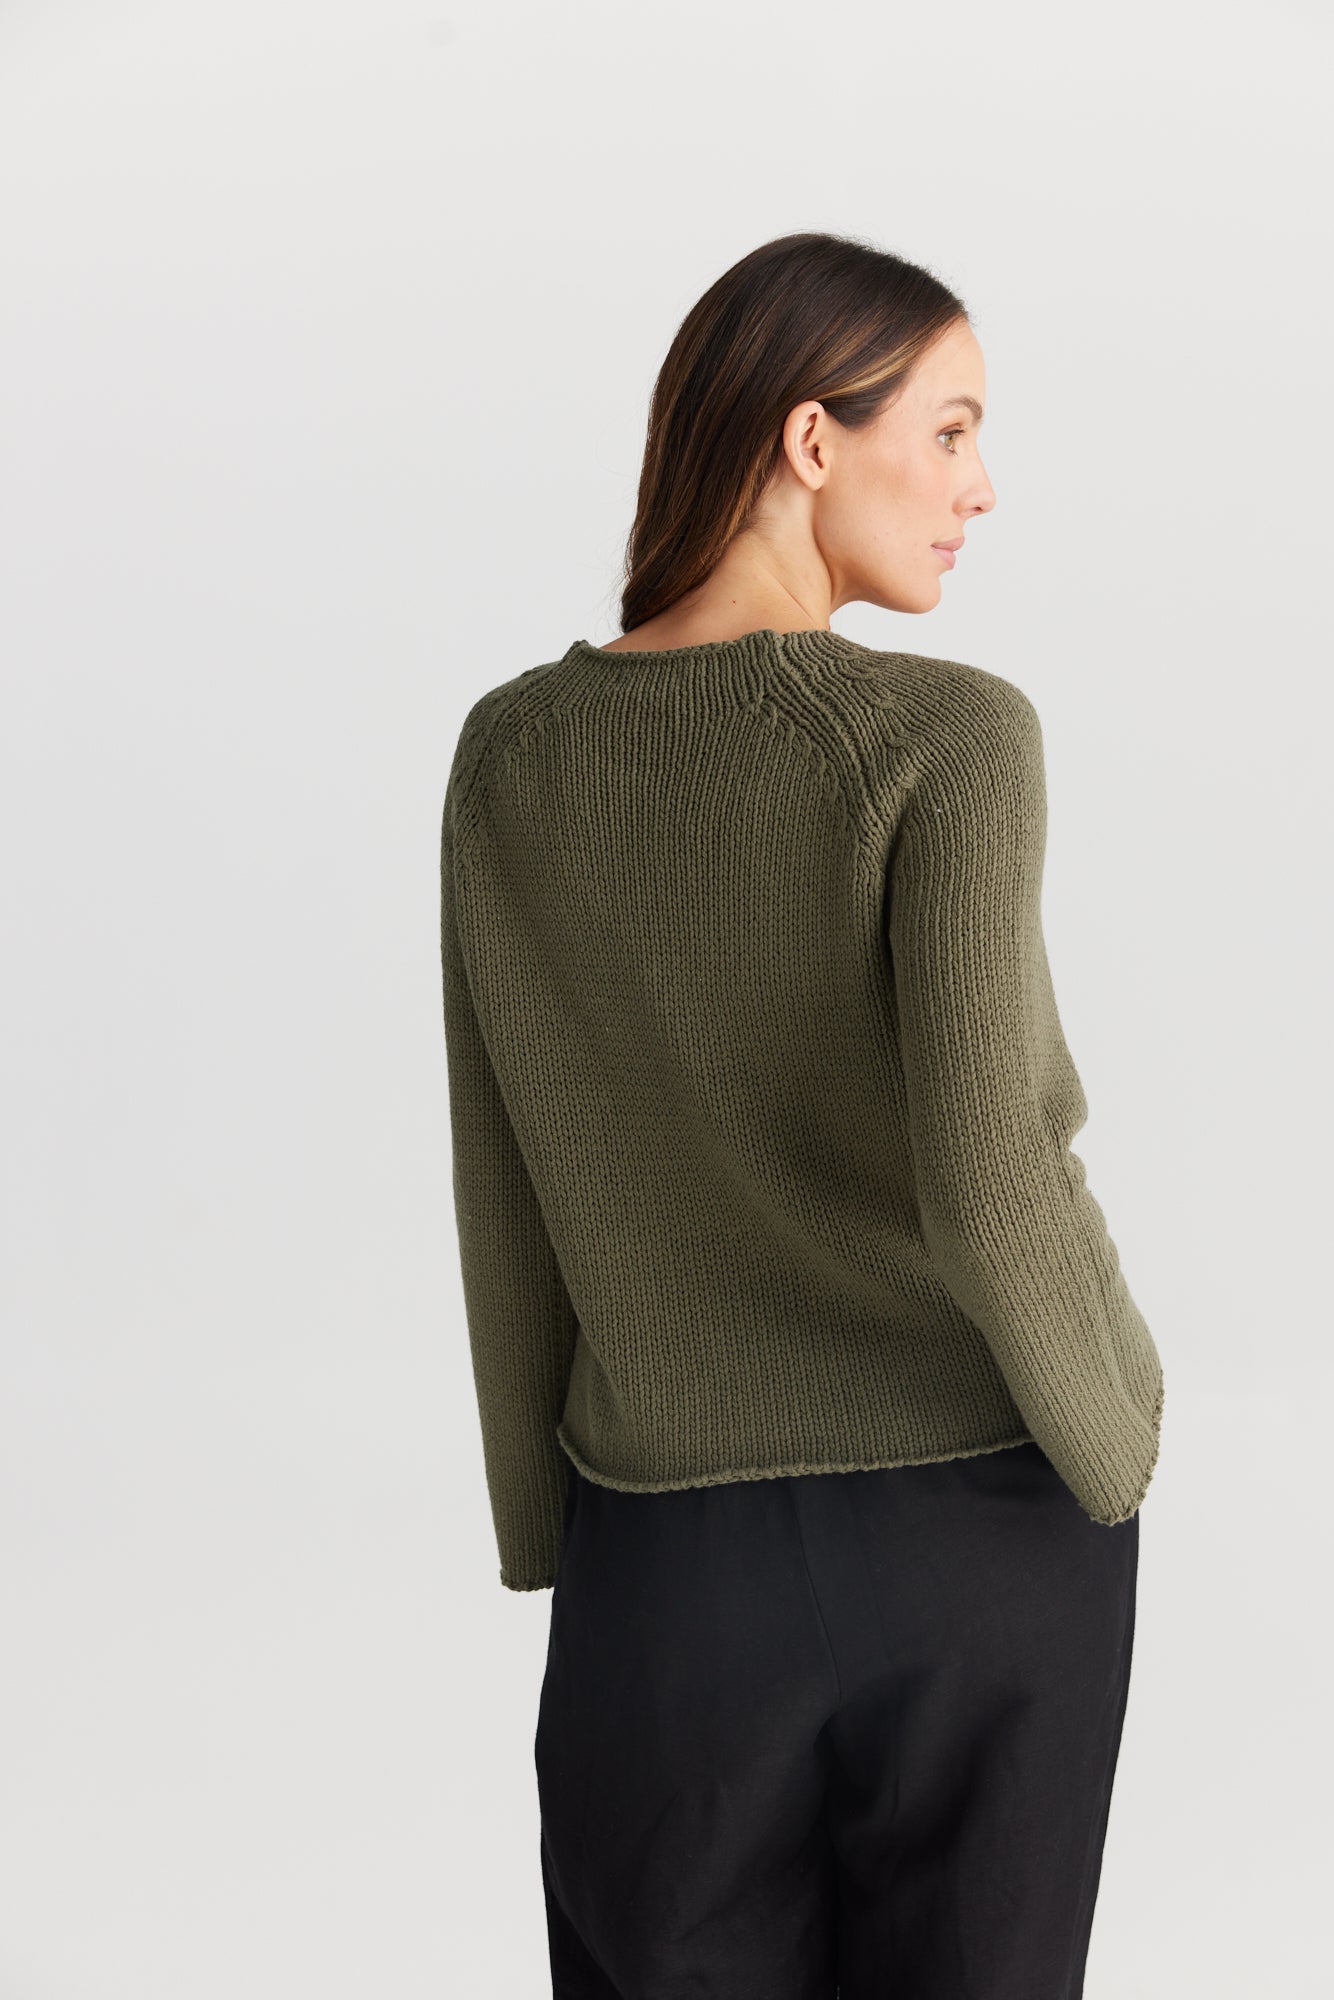 Esse Knit - Olive-Knitwear & Jumpers-The Shanty Corporation-The Bay Room